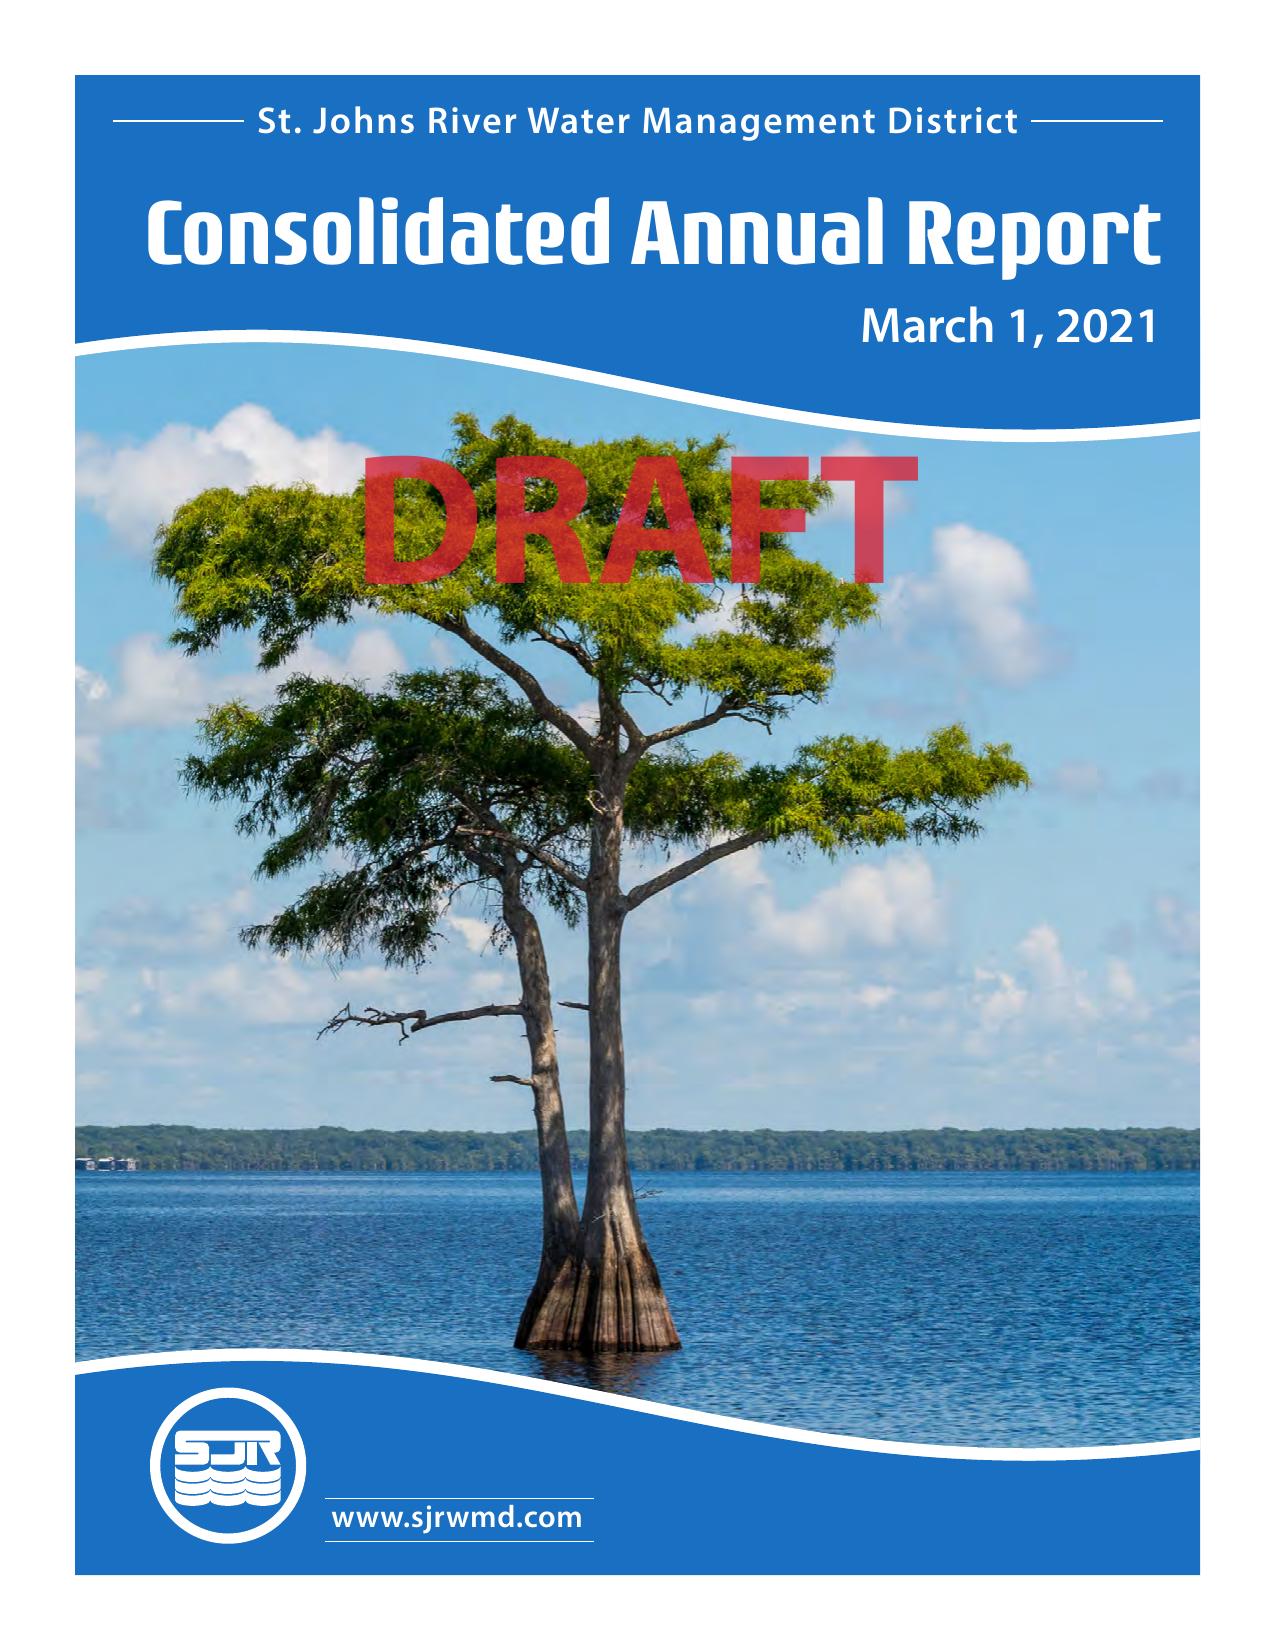 NDSPRO Annual Report